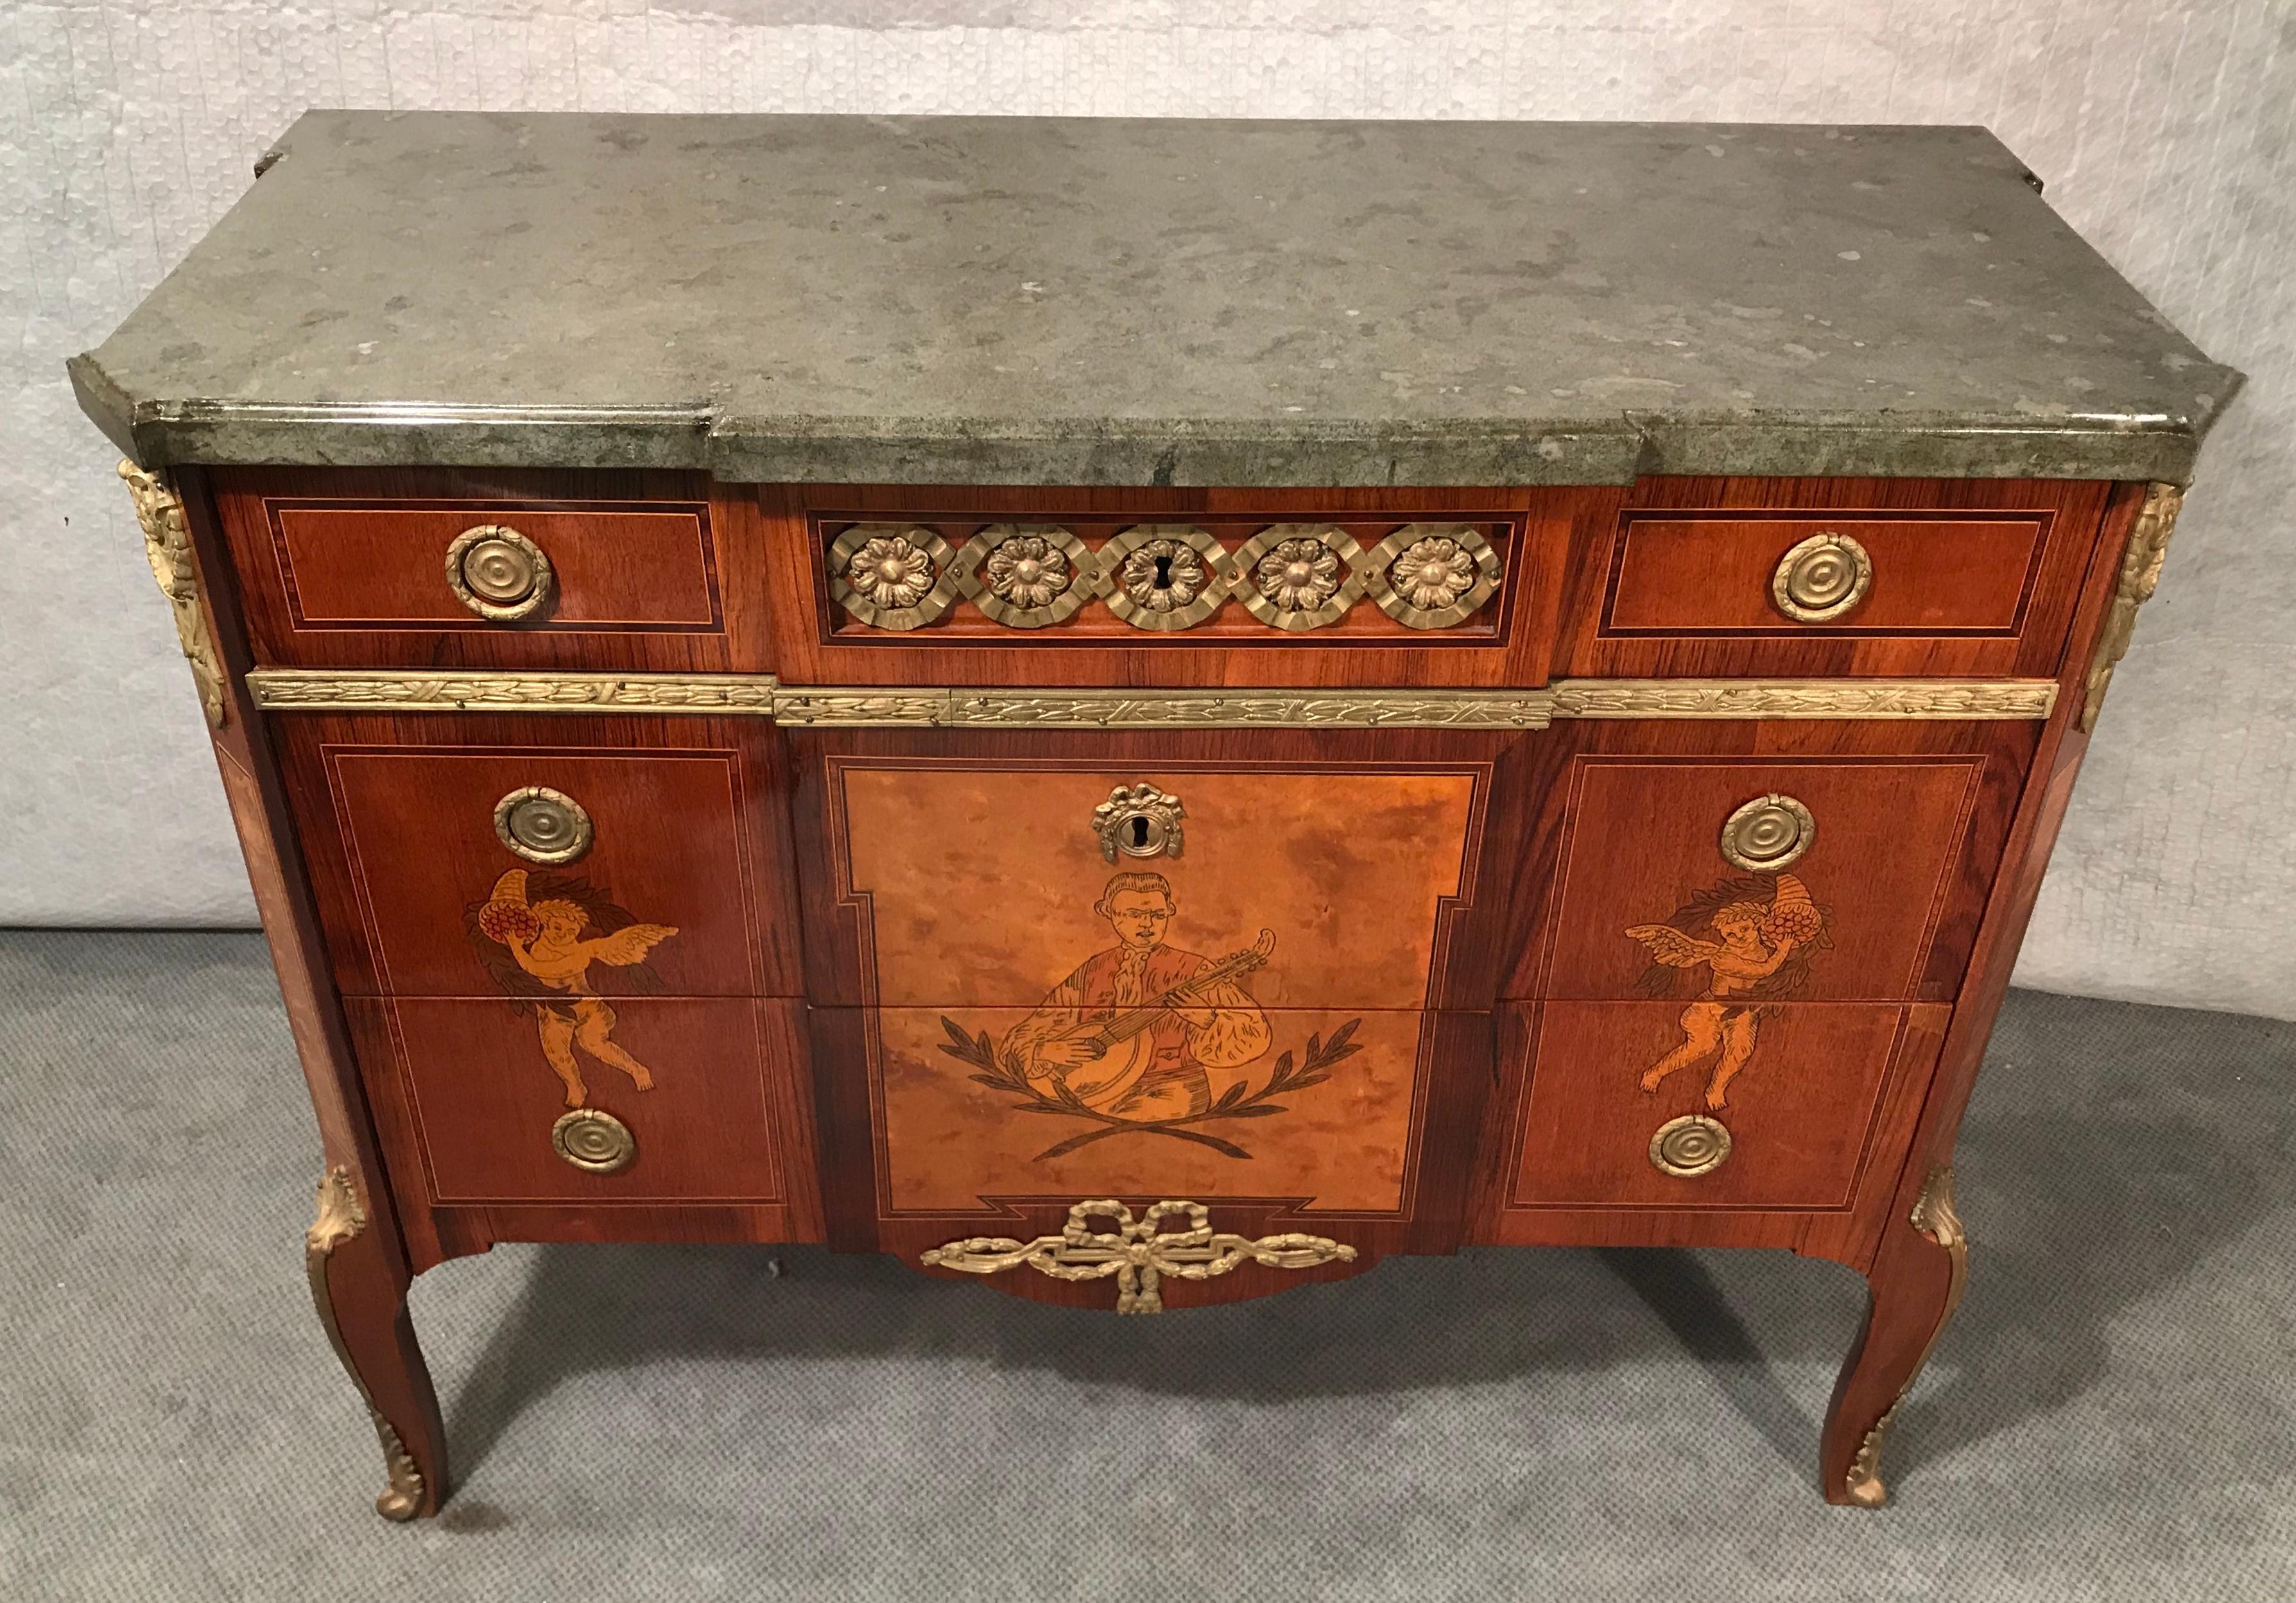 Gustavian commode, Sweden 19th century, Beautiful walnut, beechwood, elmwood and mahogany marquetry with hand drawn pictures on front and sides. Original brass fittings. Grey- greenish Kolmarden marble top. Beautiful commode in the style of the late